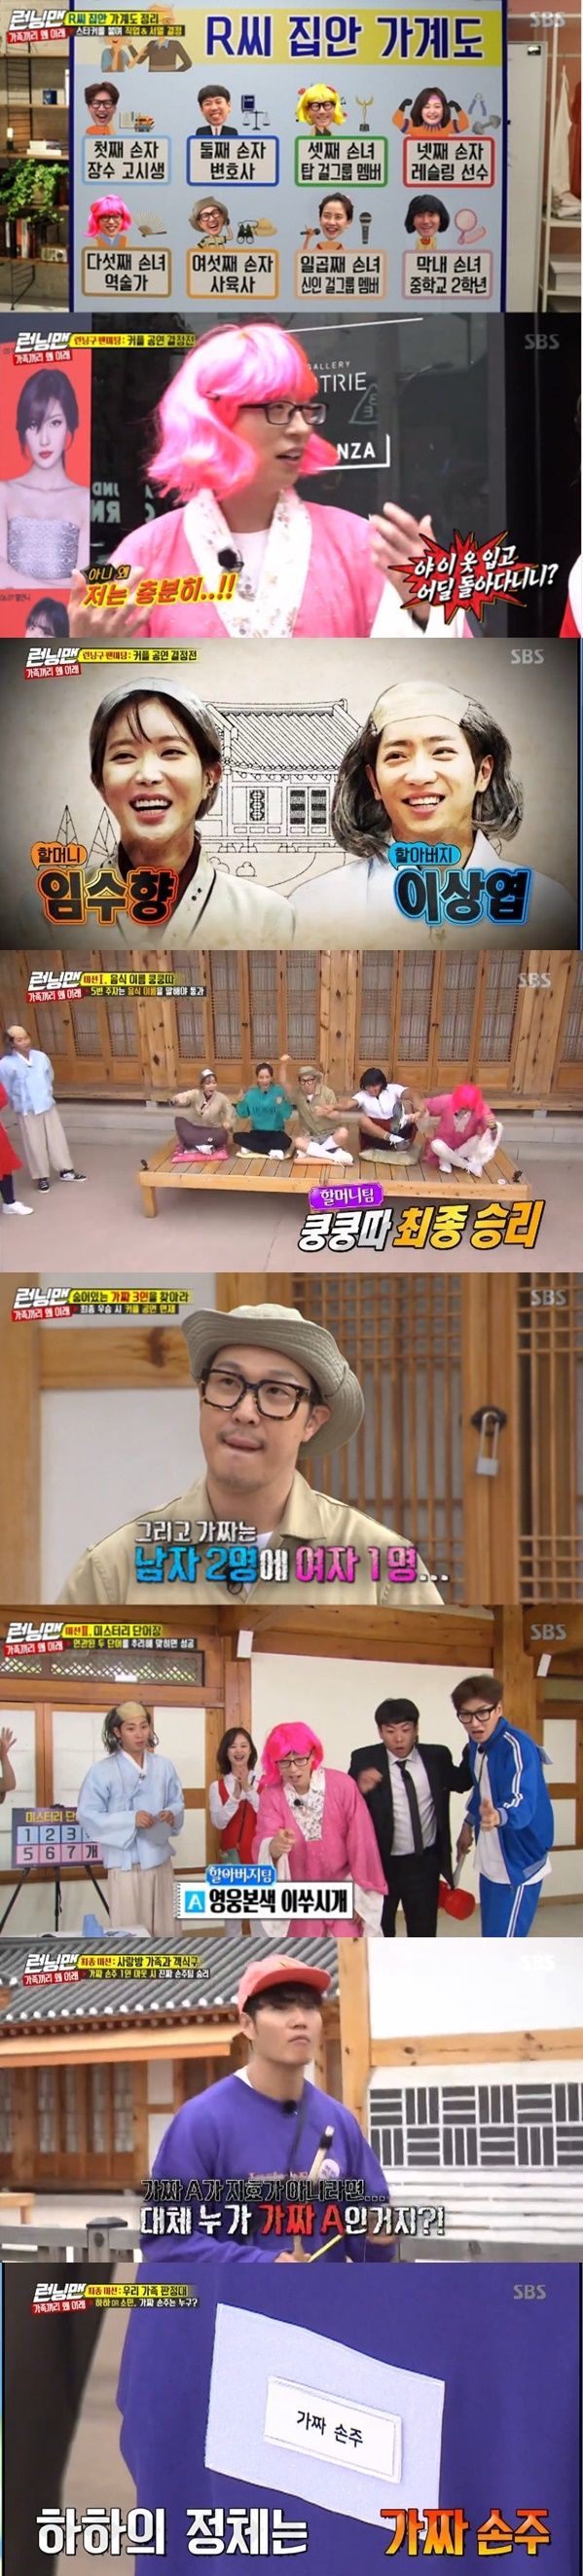 <p> Yoo Jae-Suk and HaHa Running Man 9 anniversary Love Without Love (Live at Summer Vacation/08 in the couple stage.</p><p>Viewership survey Agency Nielsen Korea, according to the last 26 days broadcast SBS Running Manper minute, with a maximum application rate of 7. 9%soared, and advertising officials of the important indicators of 2049 target audience3. 1%(NCR furniture viewership Part 2 standard)record for the same time period, 1 ranked. Average viewership is NCR Standards Part 1 of 4. 9%, Part 2 6. 6%.</p><p>This day broadcast of Running Man 9th anniversary special project Running Man Love Without Love (Live at Summer Vacation/08 - running research project the second story decorated. Last week the broadcasting project in the first public and group danceand had members this time a couple gigsand fake hand findstepped forward.</p><p>8 of the members are cousins with laughter inside looks like, and learn any number of directions and this leaves the family of the grandmother, the grandfather role as our grandchildren are five, why not eight?said the authentic start of the race. This time race in the real hand and final hand very fake 3 to figure out to win the race, FAKE 3s grandchildren only out to win was done in a way.</p><p>Grandpa Tim and grandma as a team handing The Mission this was done, and 1 car The Mission food names, stomp offto Grandmas team a fake Man 2 Woman 1the hint was obtained. Since The Mission through the options for this cute and special effect fake noticed, the fake grandchild to go to. This scene is per minute, with a maximum application rate of 7. 9%and the best 1 minute.</p><p>Eventually one of the couples performances 1 is determined as the Middle, add 1 is the filmmaker decided to have Yoo Jae-Suk, one of the partners pulled out. Love Without Love (Live at Summer Vacation/08 in a couple of performances to Yoo Jae-Suk - do you have any performances to showcase local expectations.</p>